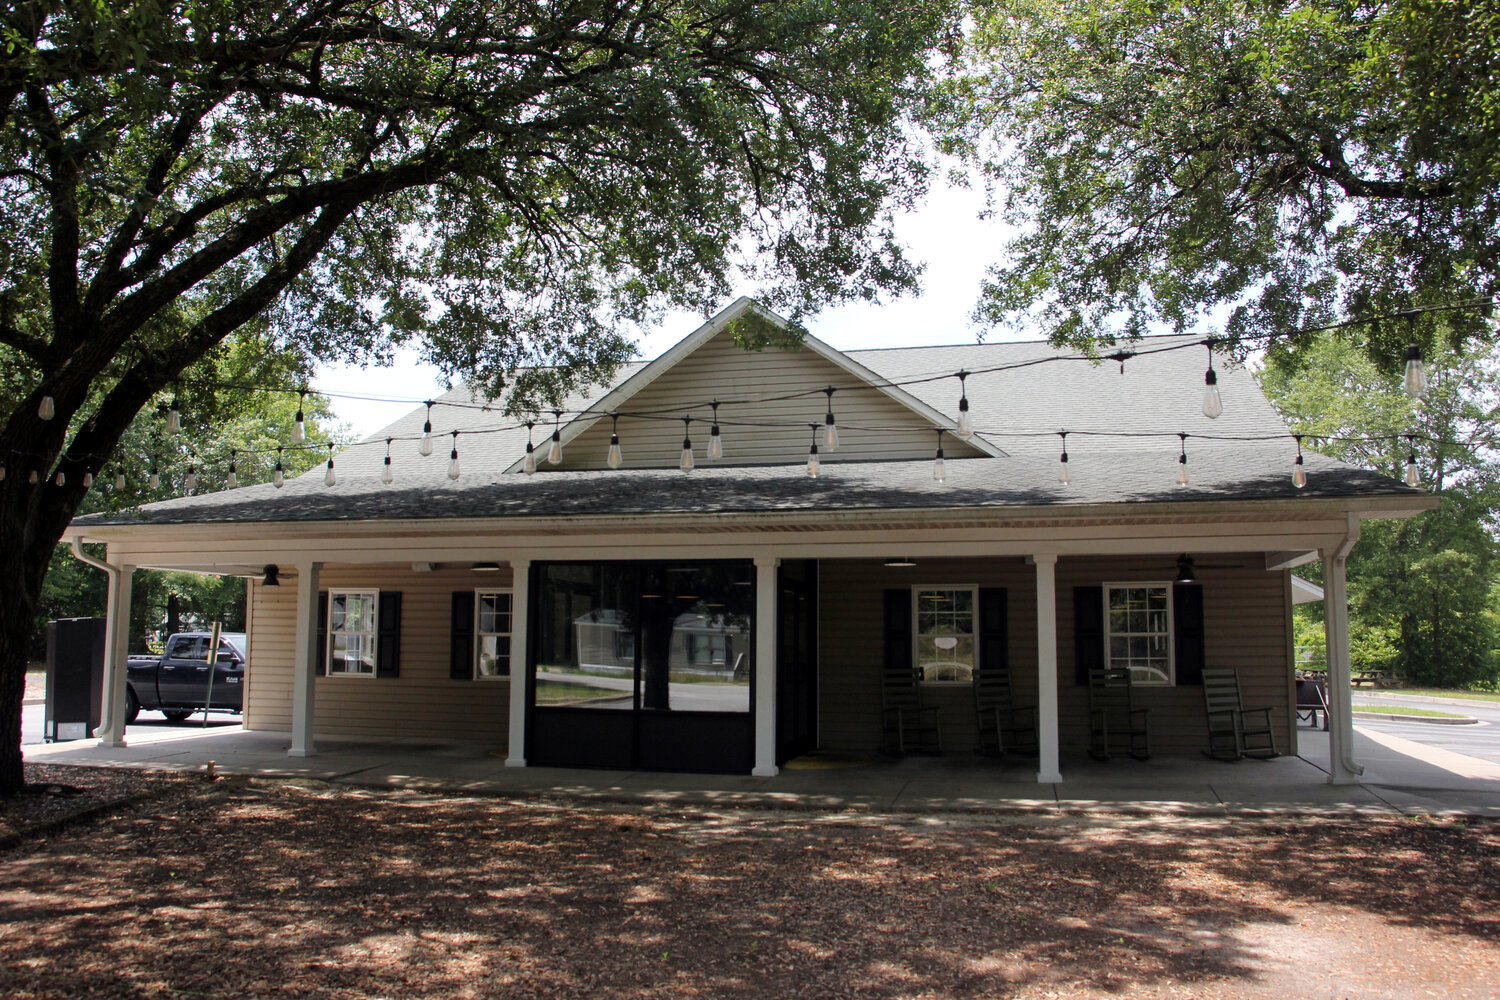 Oak Grove Fish House is set to be replaced by Bone-Appetite.